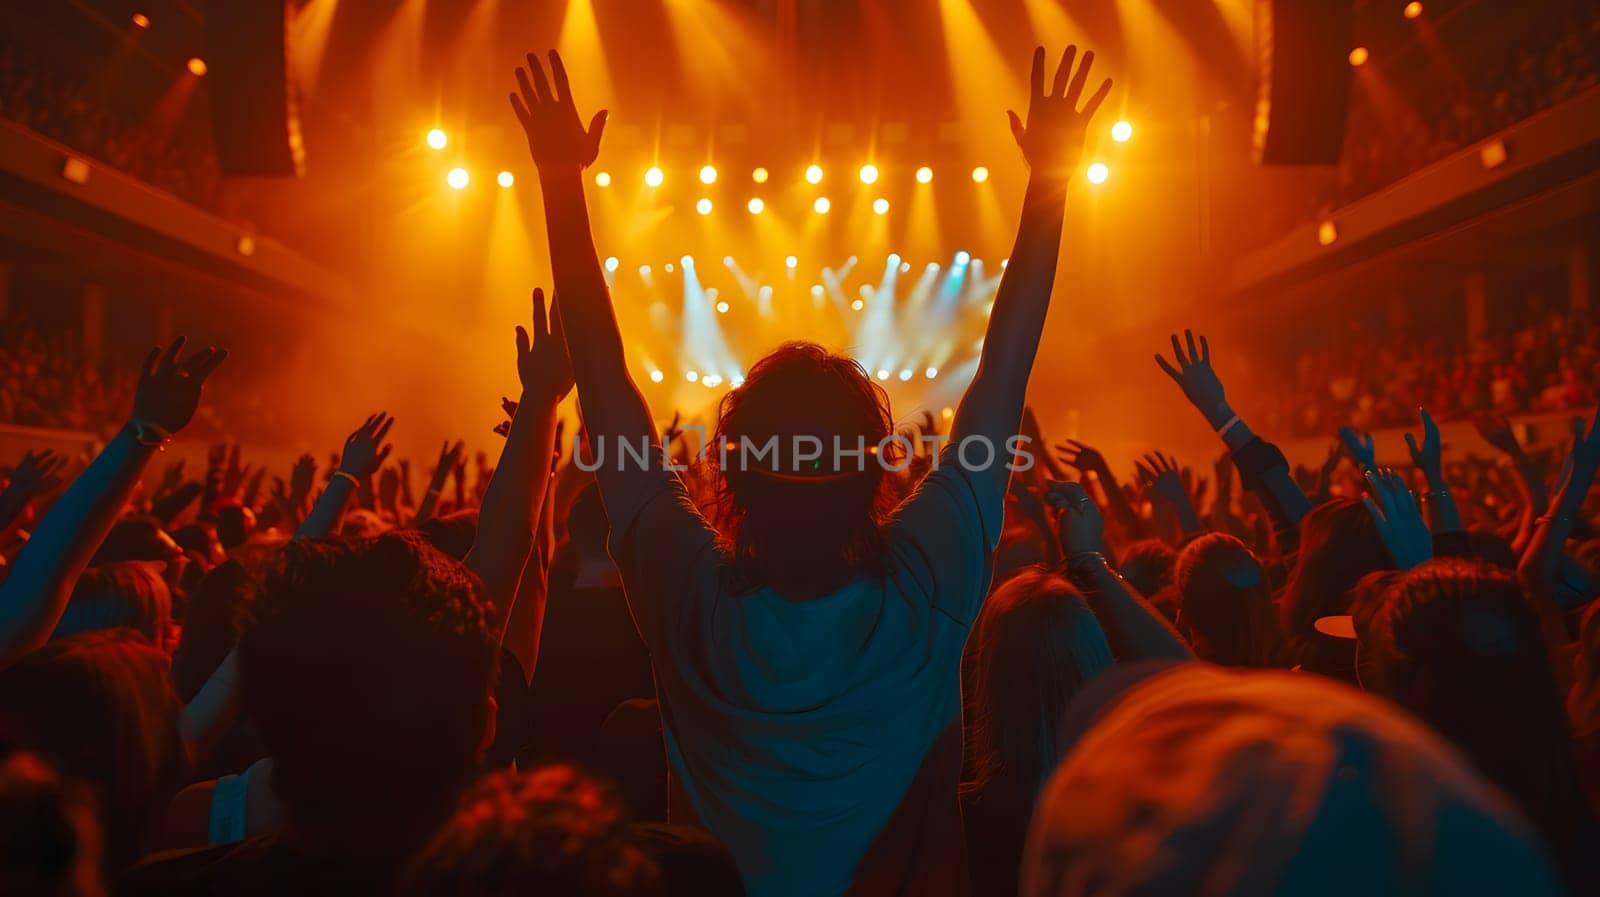 A social group is having fun at an entertainment event under the orange sky, with hands in the air, enjoying a concert at a music venue